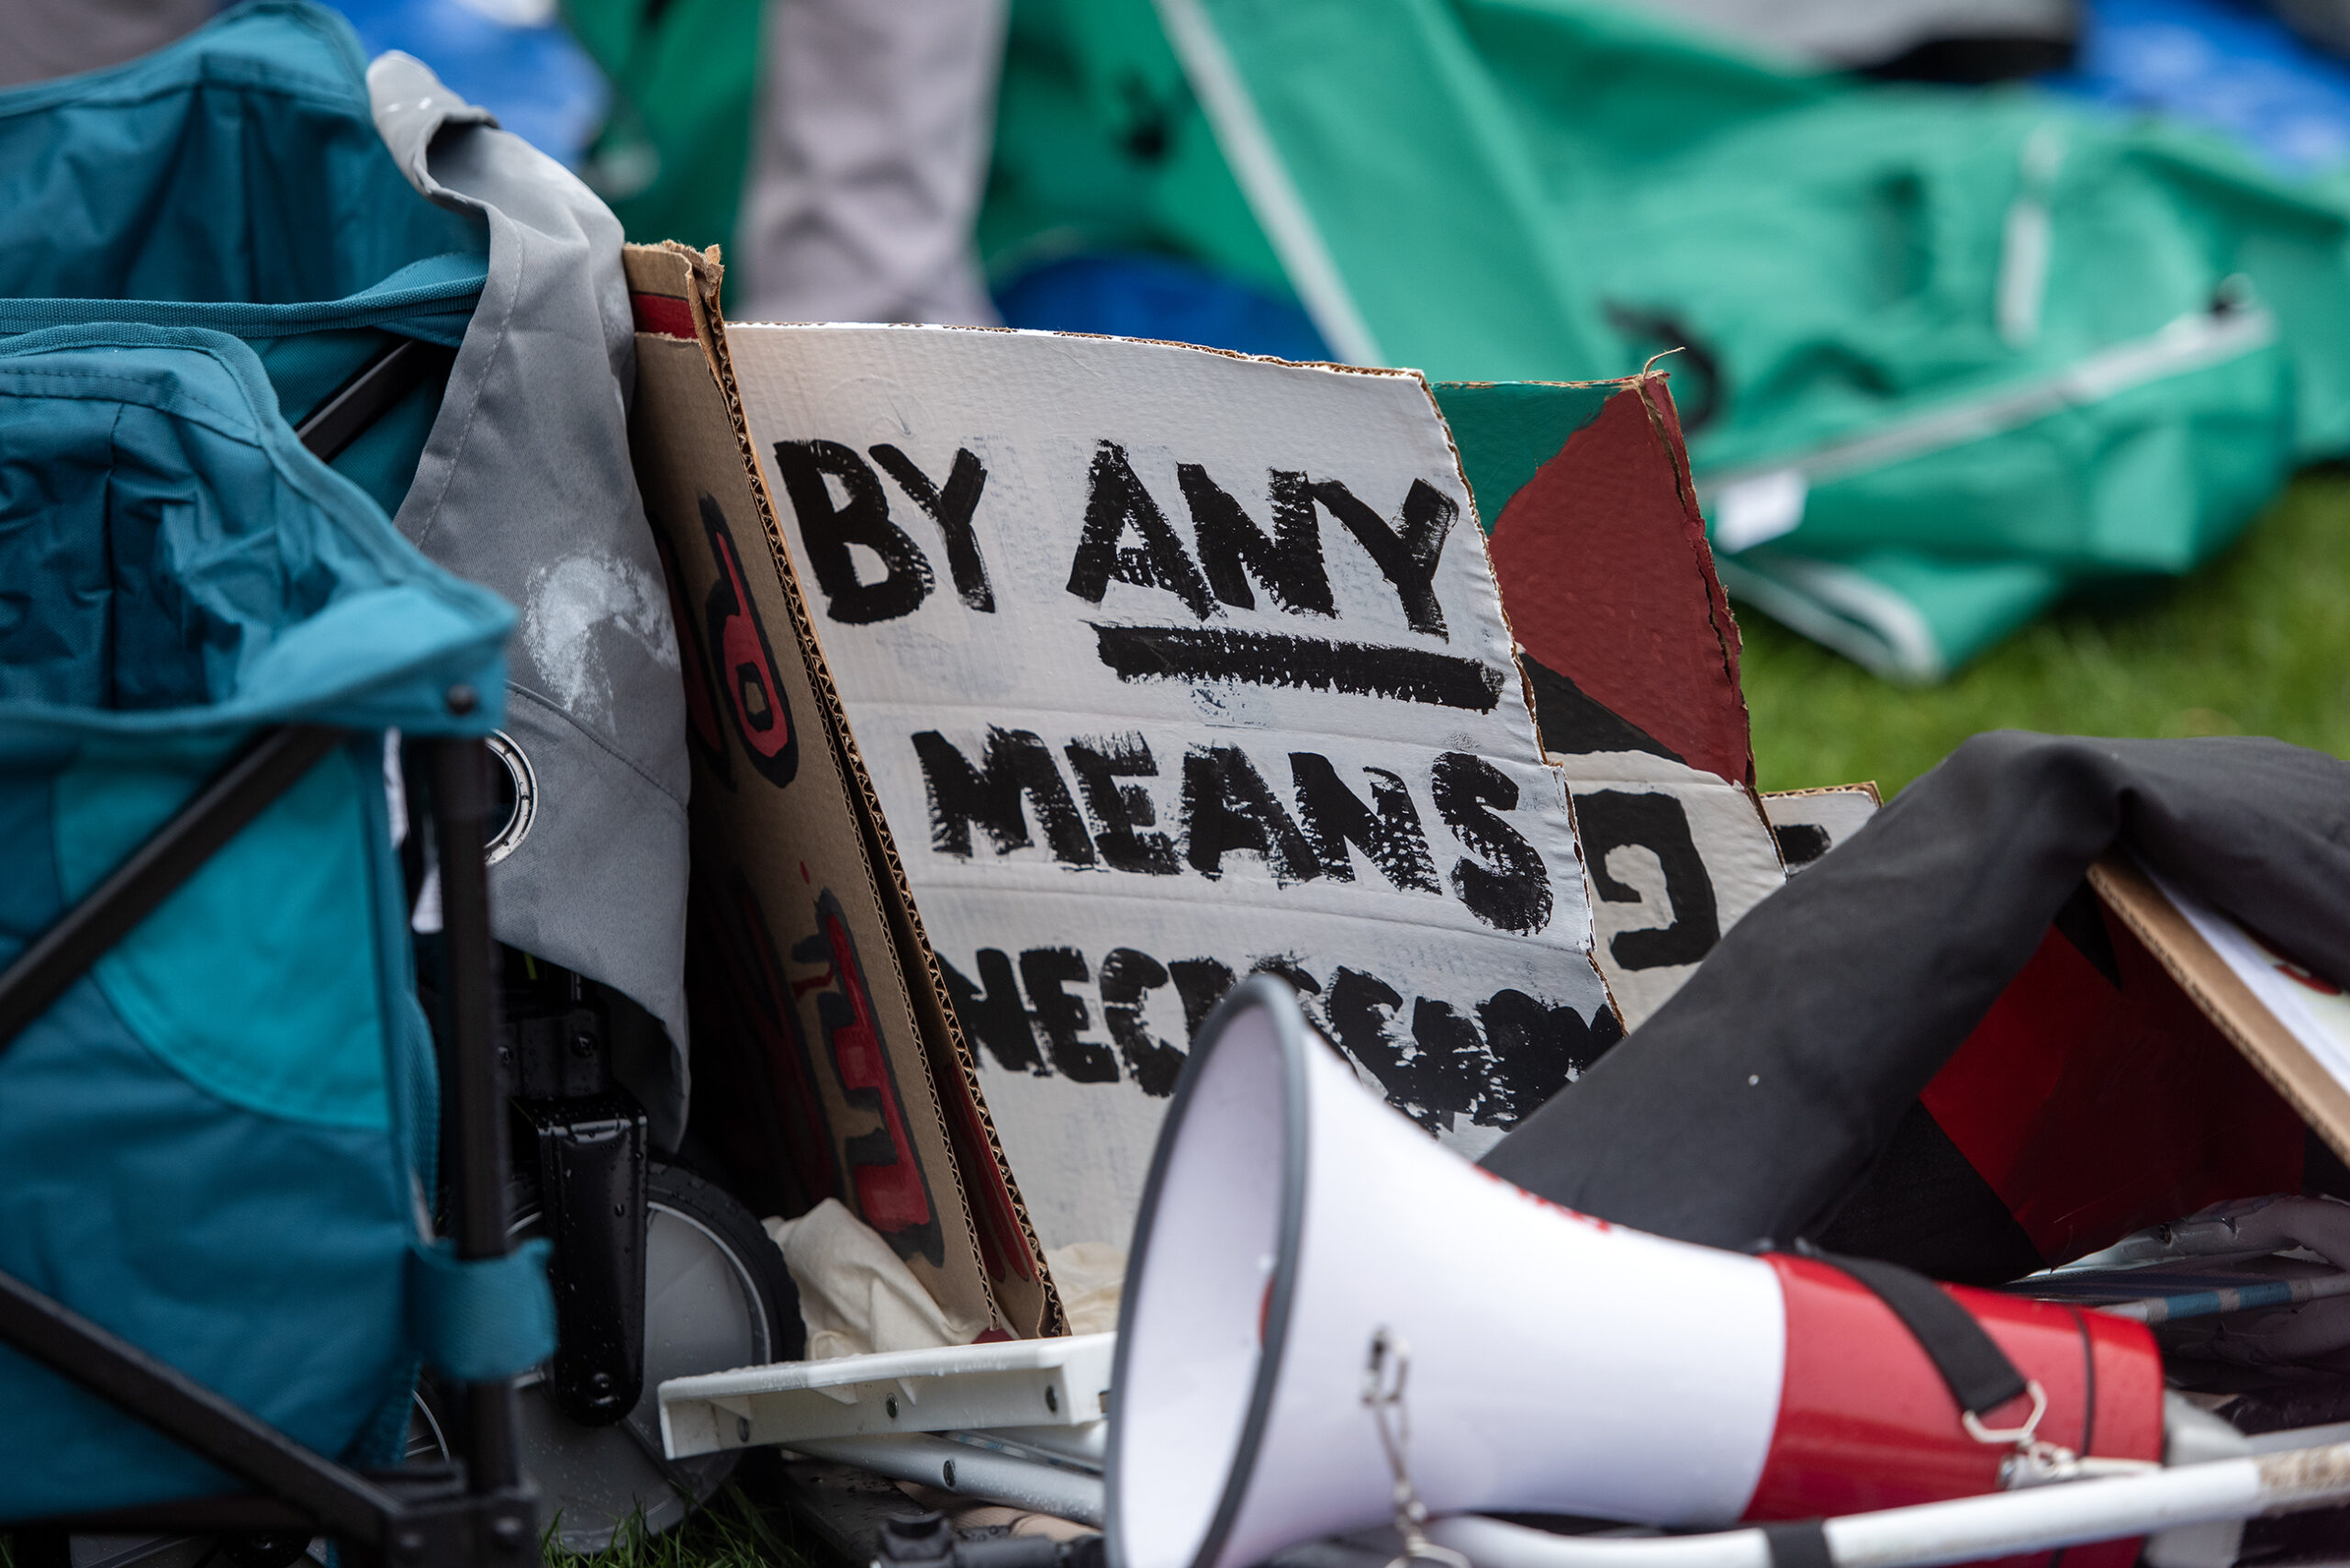 A sign propped up on the ground says "By any means necessary." A megaphone sits nearby as well.